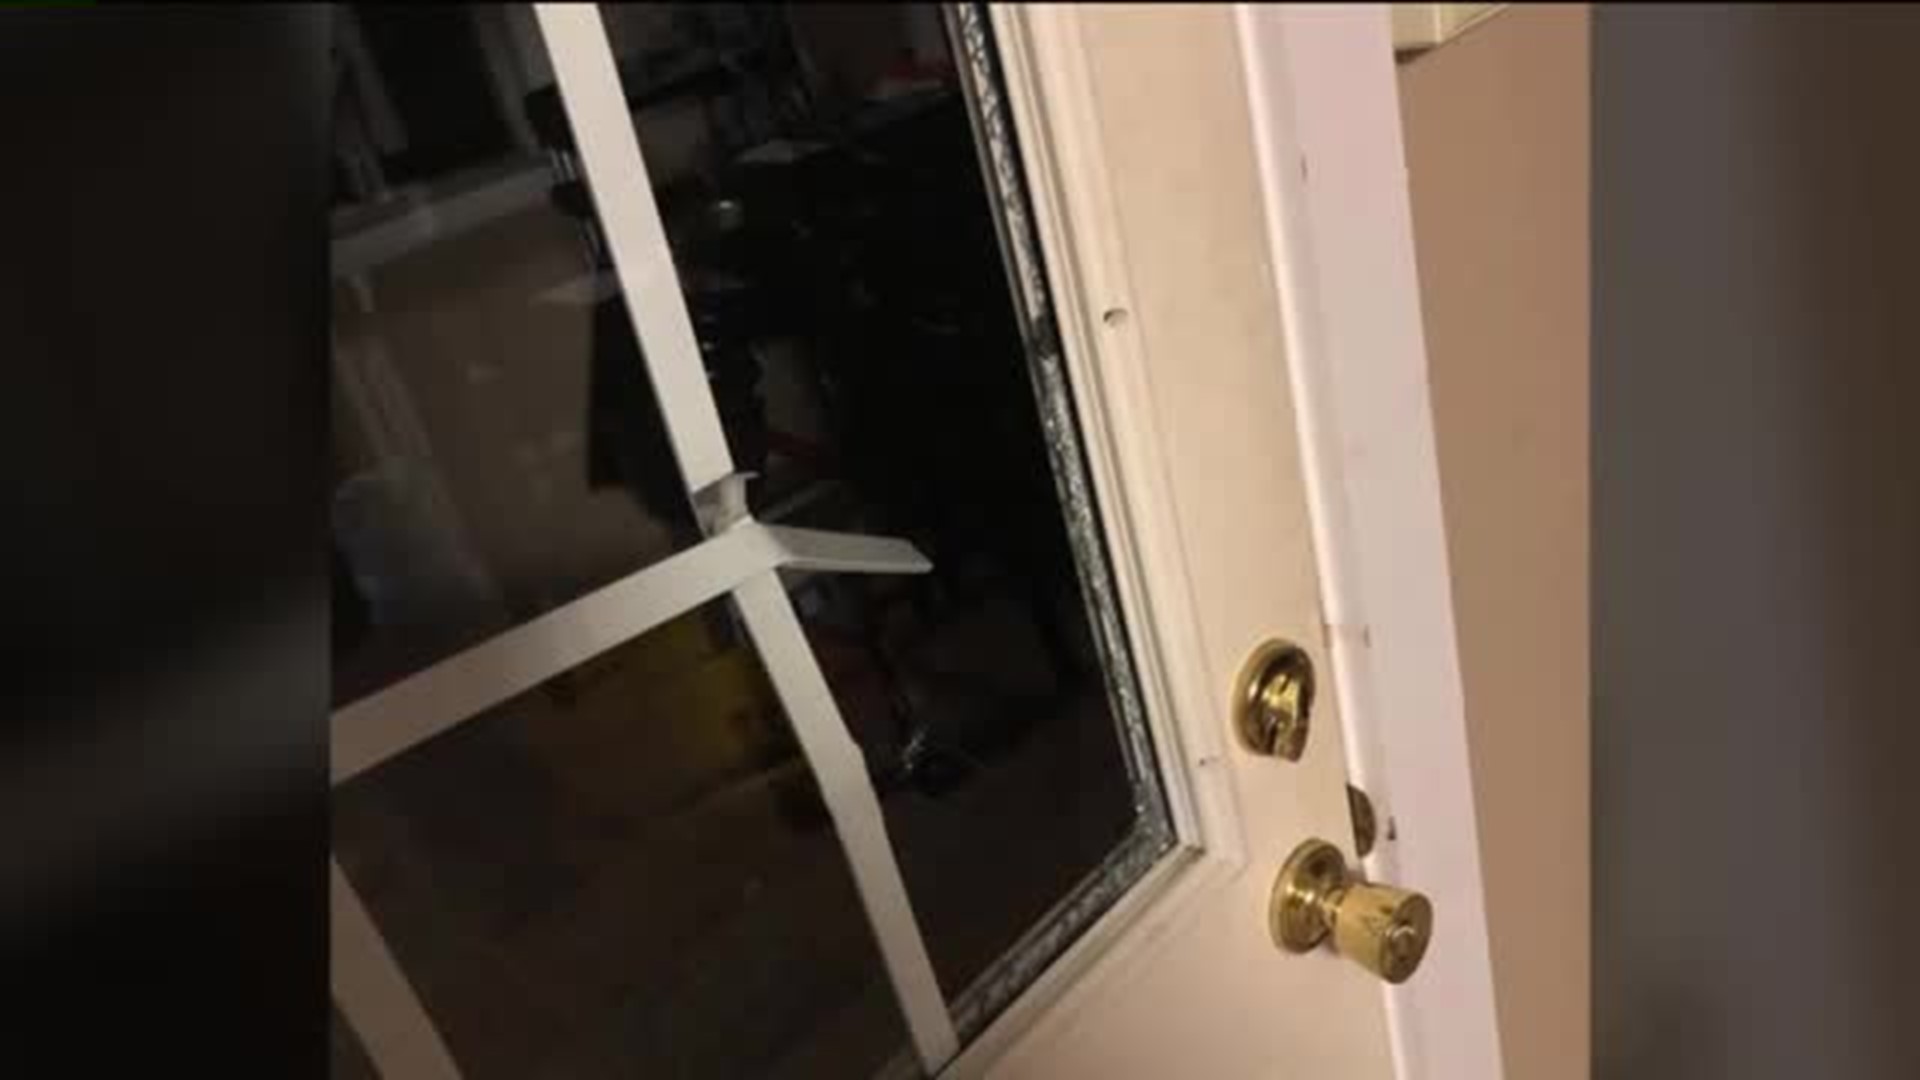 Police Searching for Burglar in Luzerne County